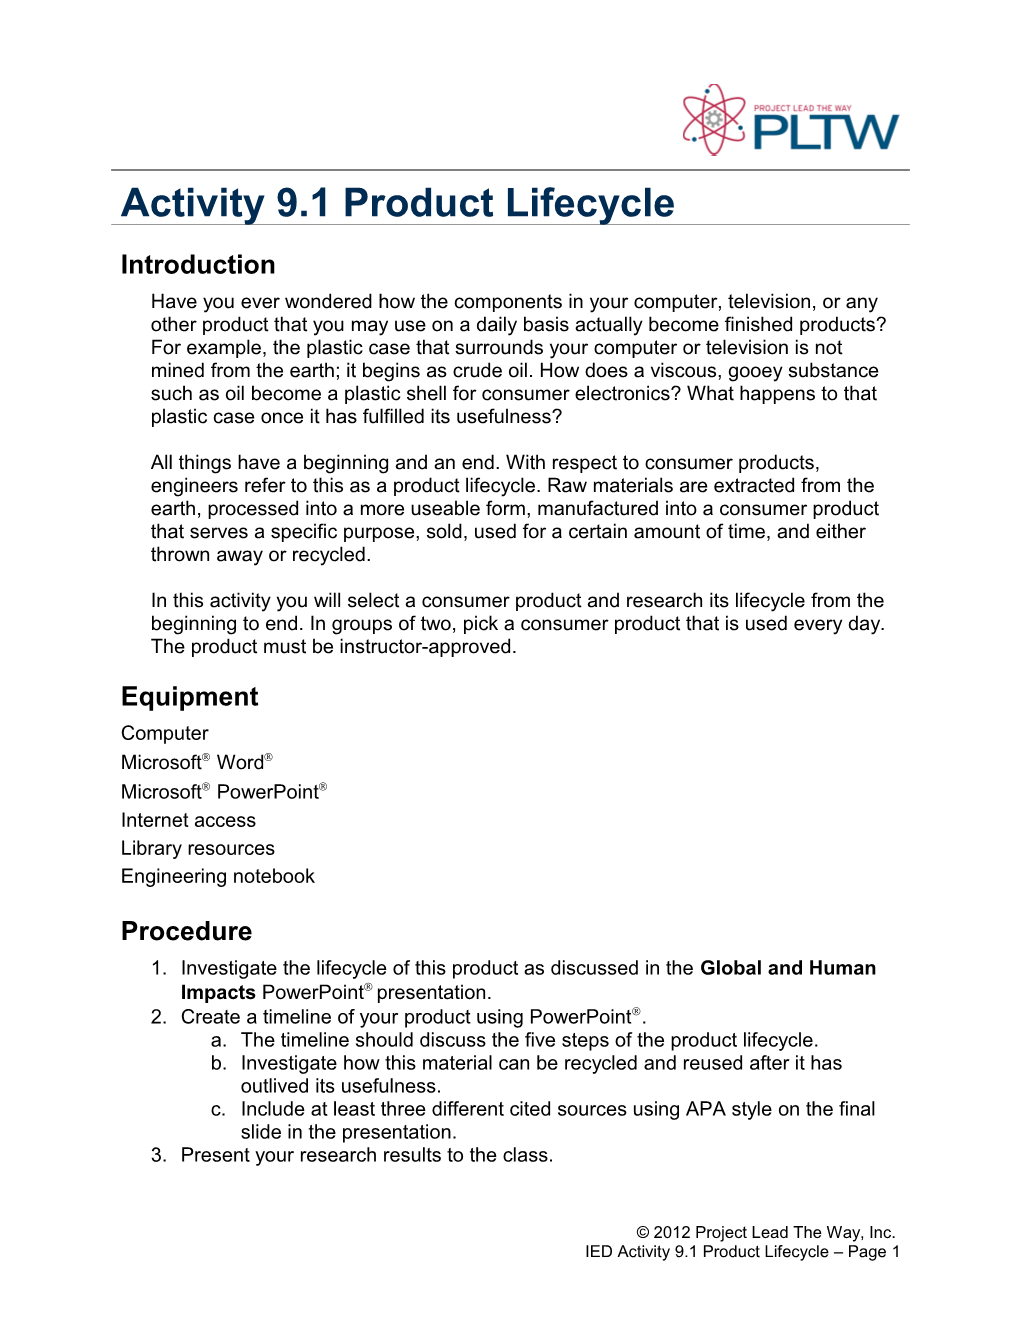 Activity 9.1 Product Lifecycle